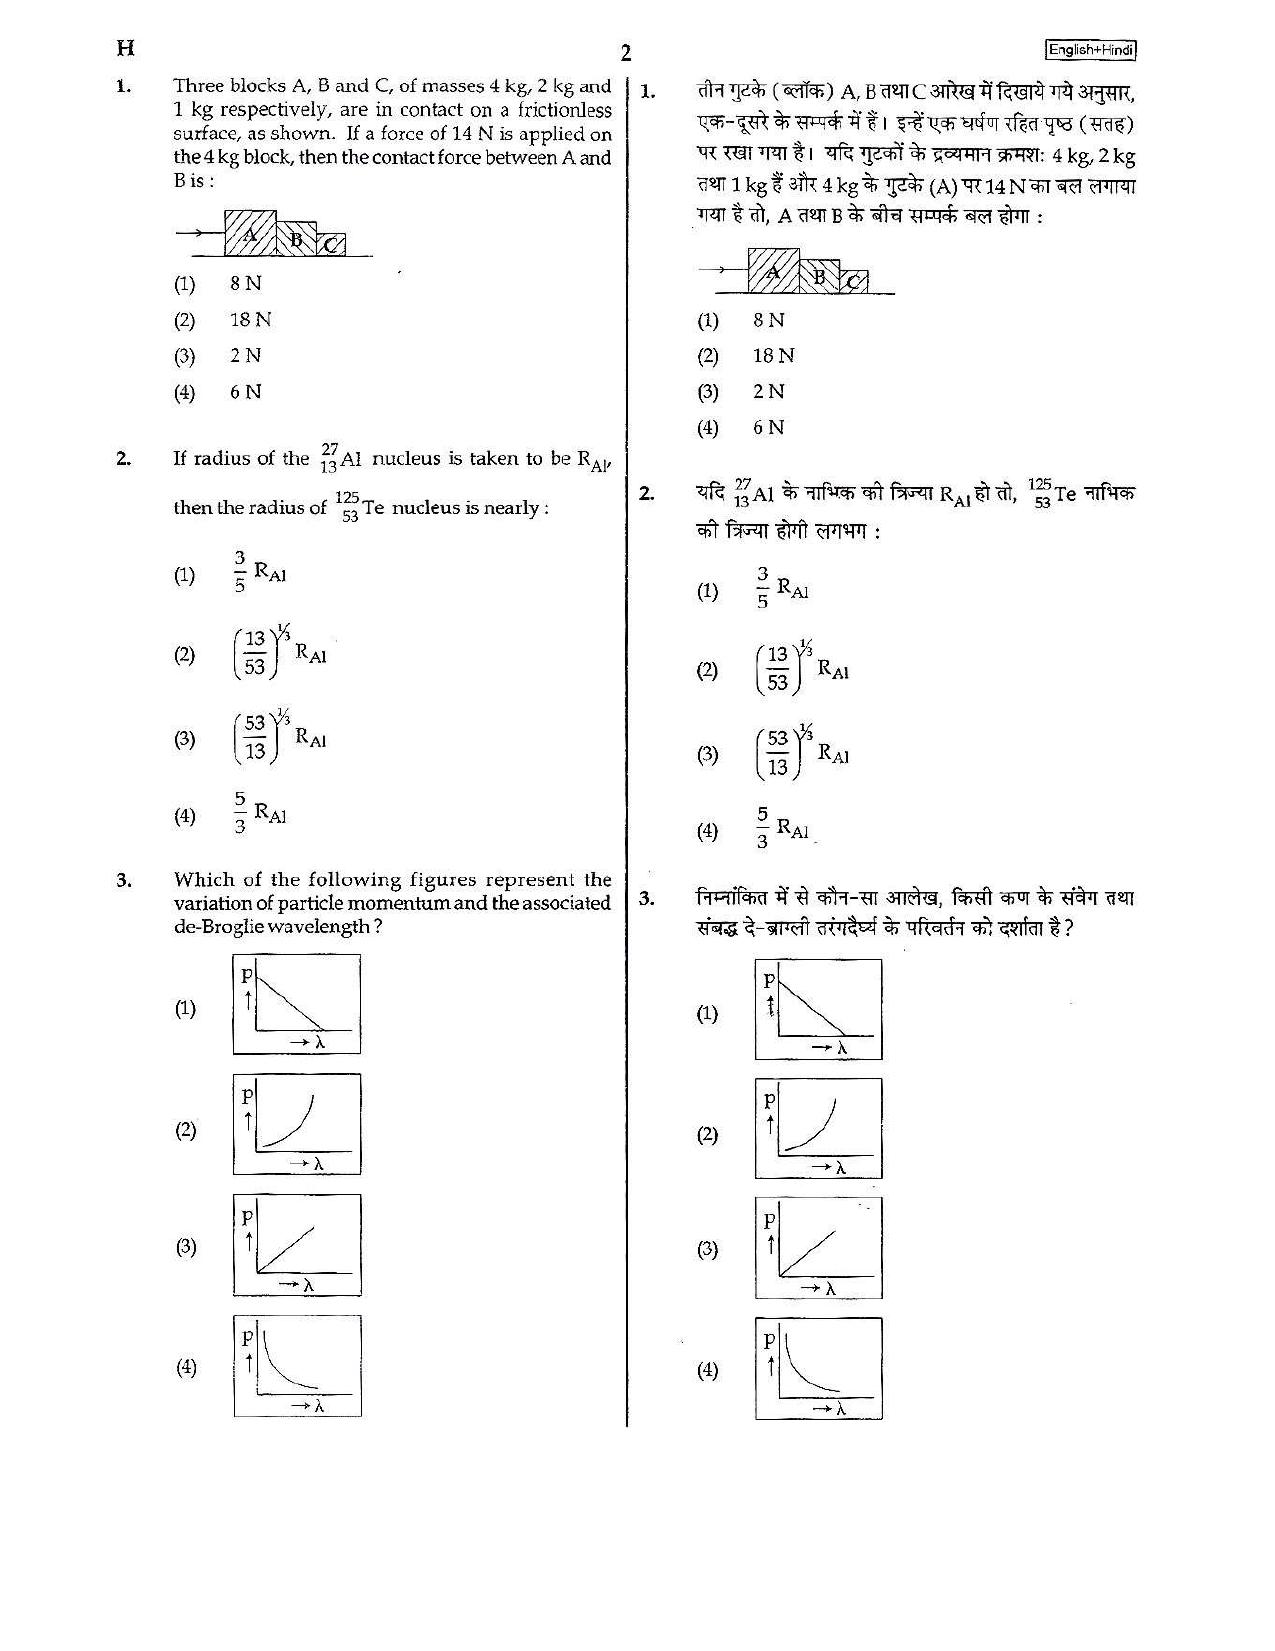 NEET Code H 2015 Question Paper - Page 2